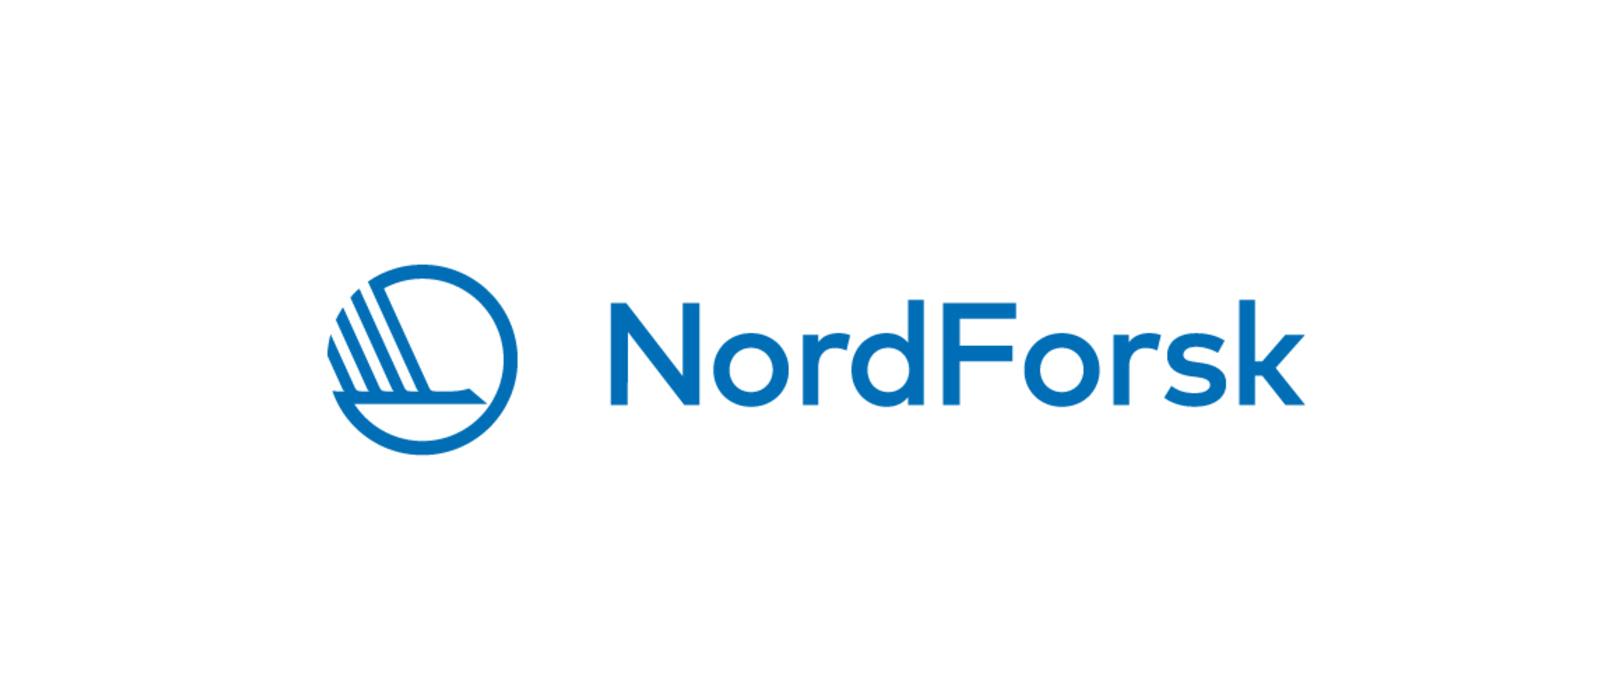 New funding for migration research from NordForsk